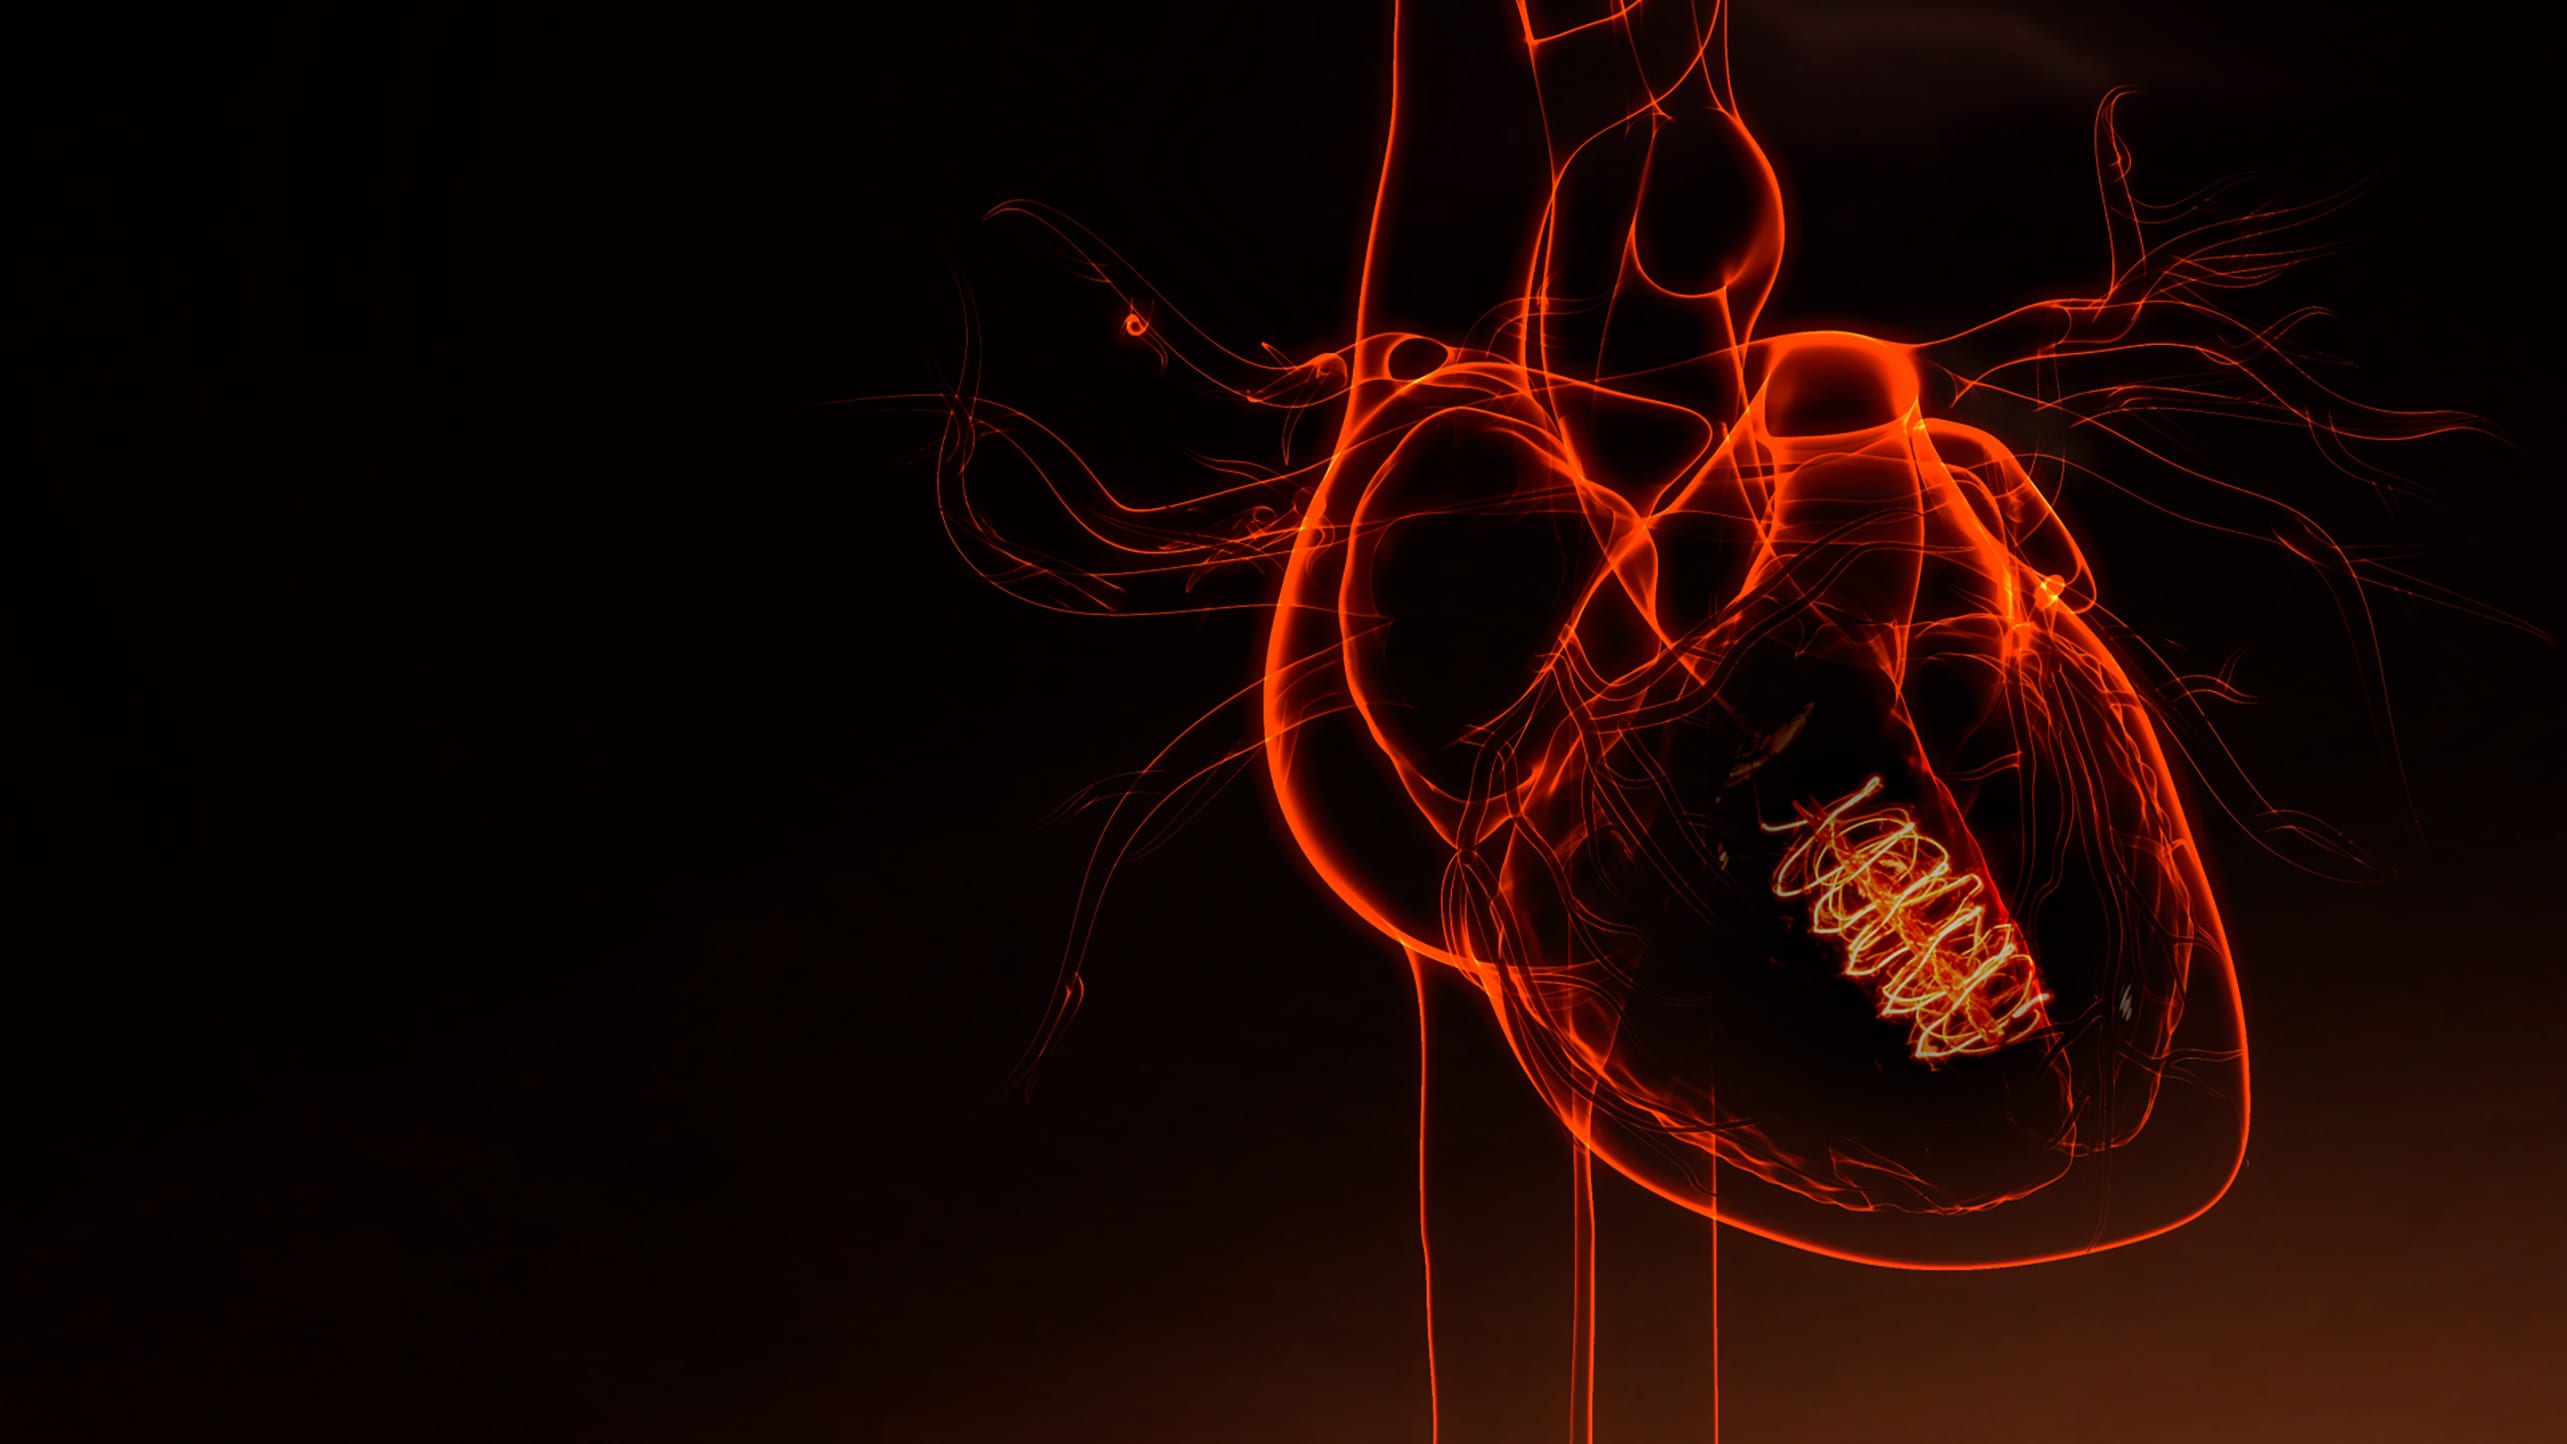 An illustration of a heart with a light bulb flickering in it.